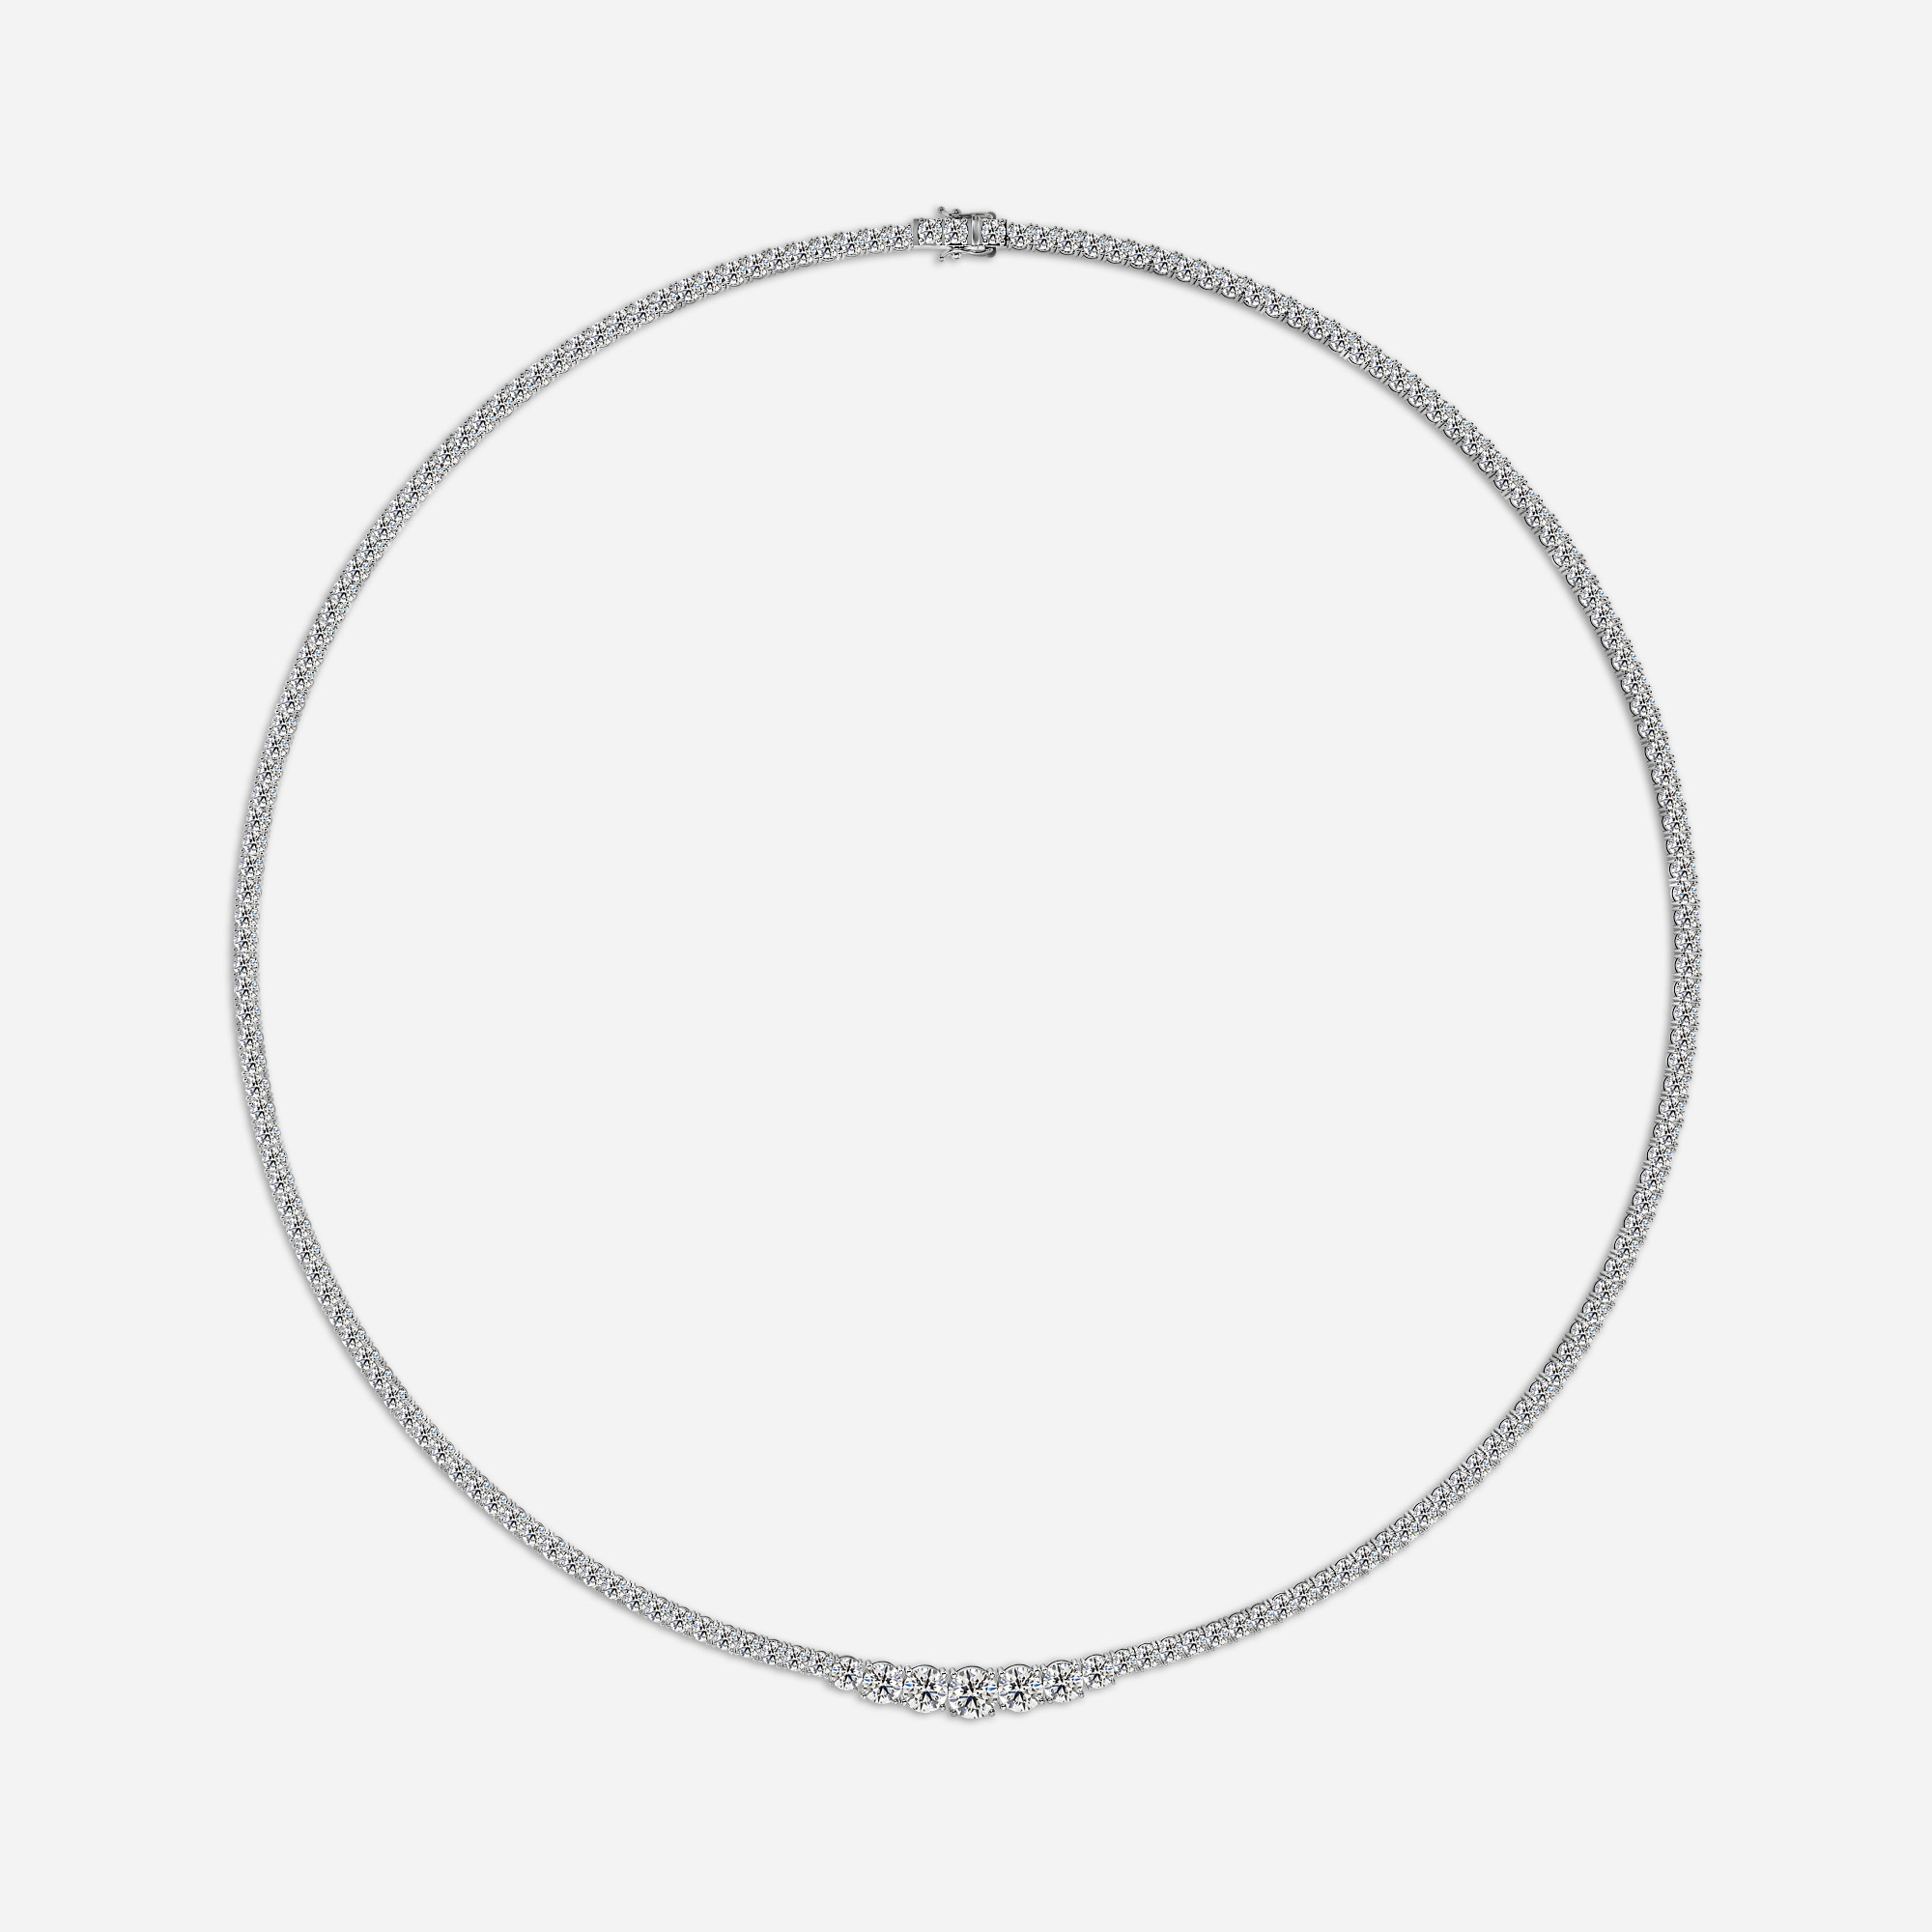 10.19 Ct Graduated Diamond Tennis Necklaces In White Gold